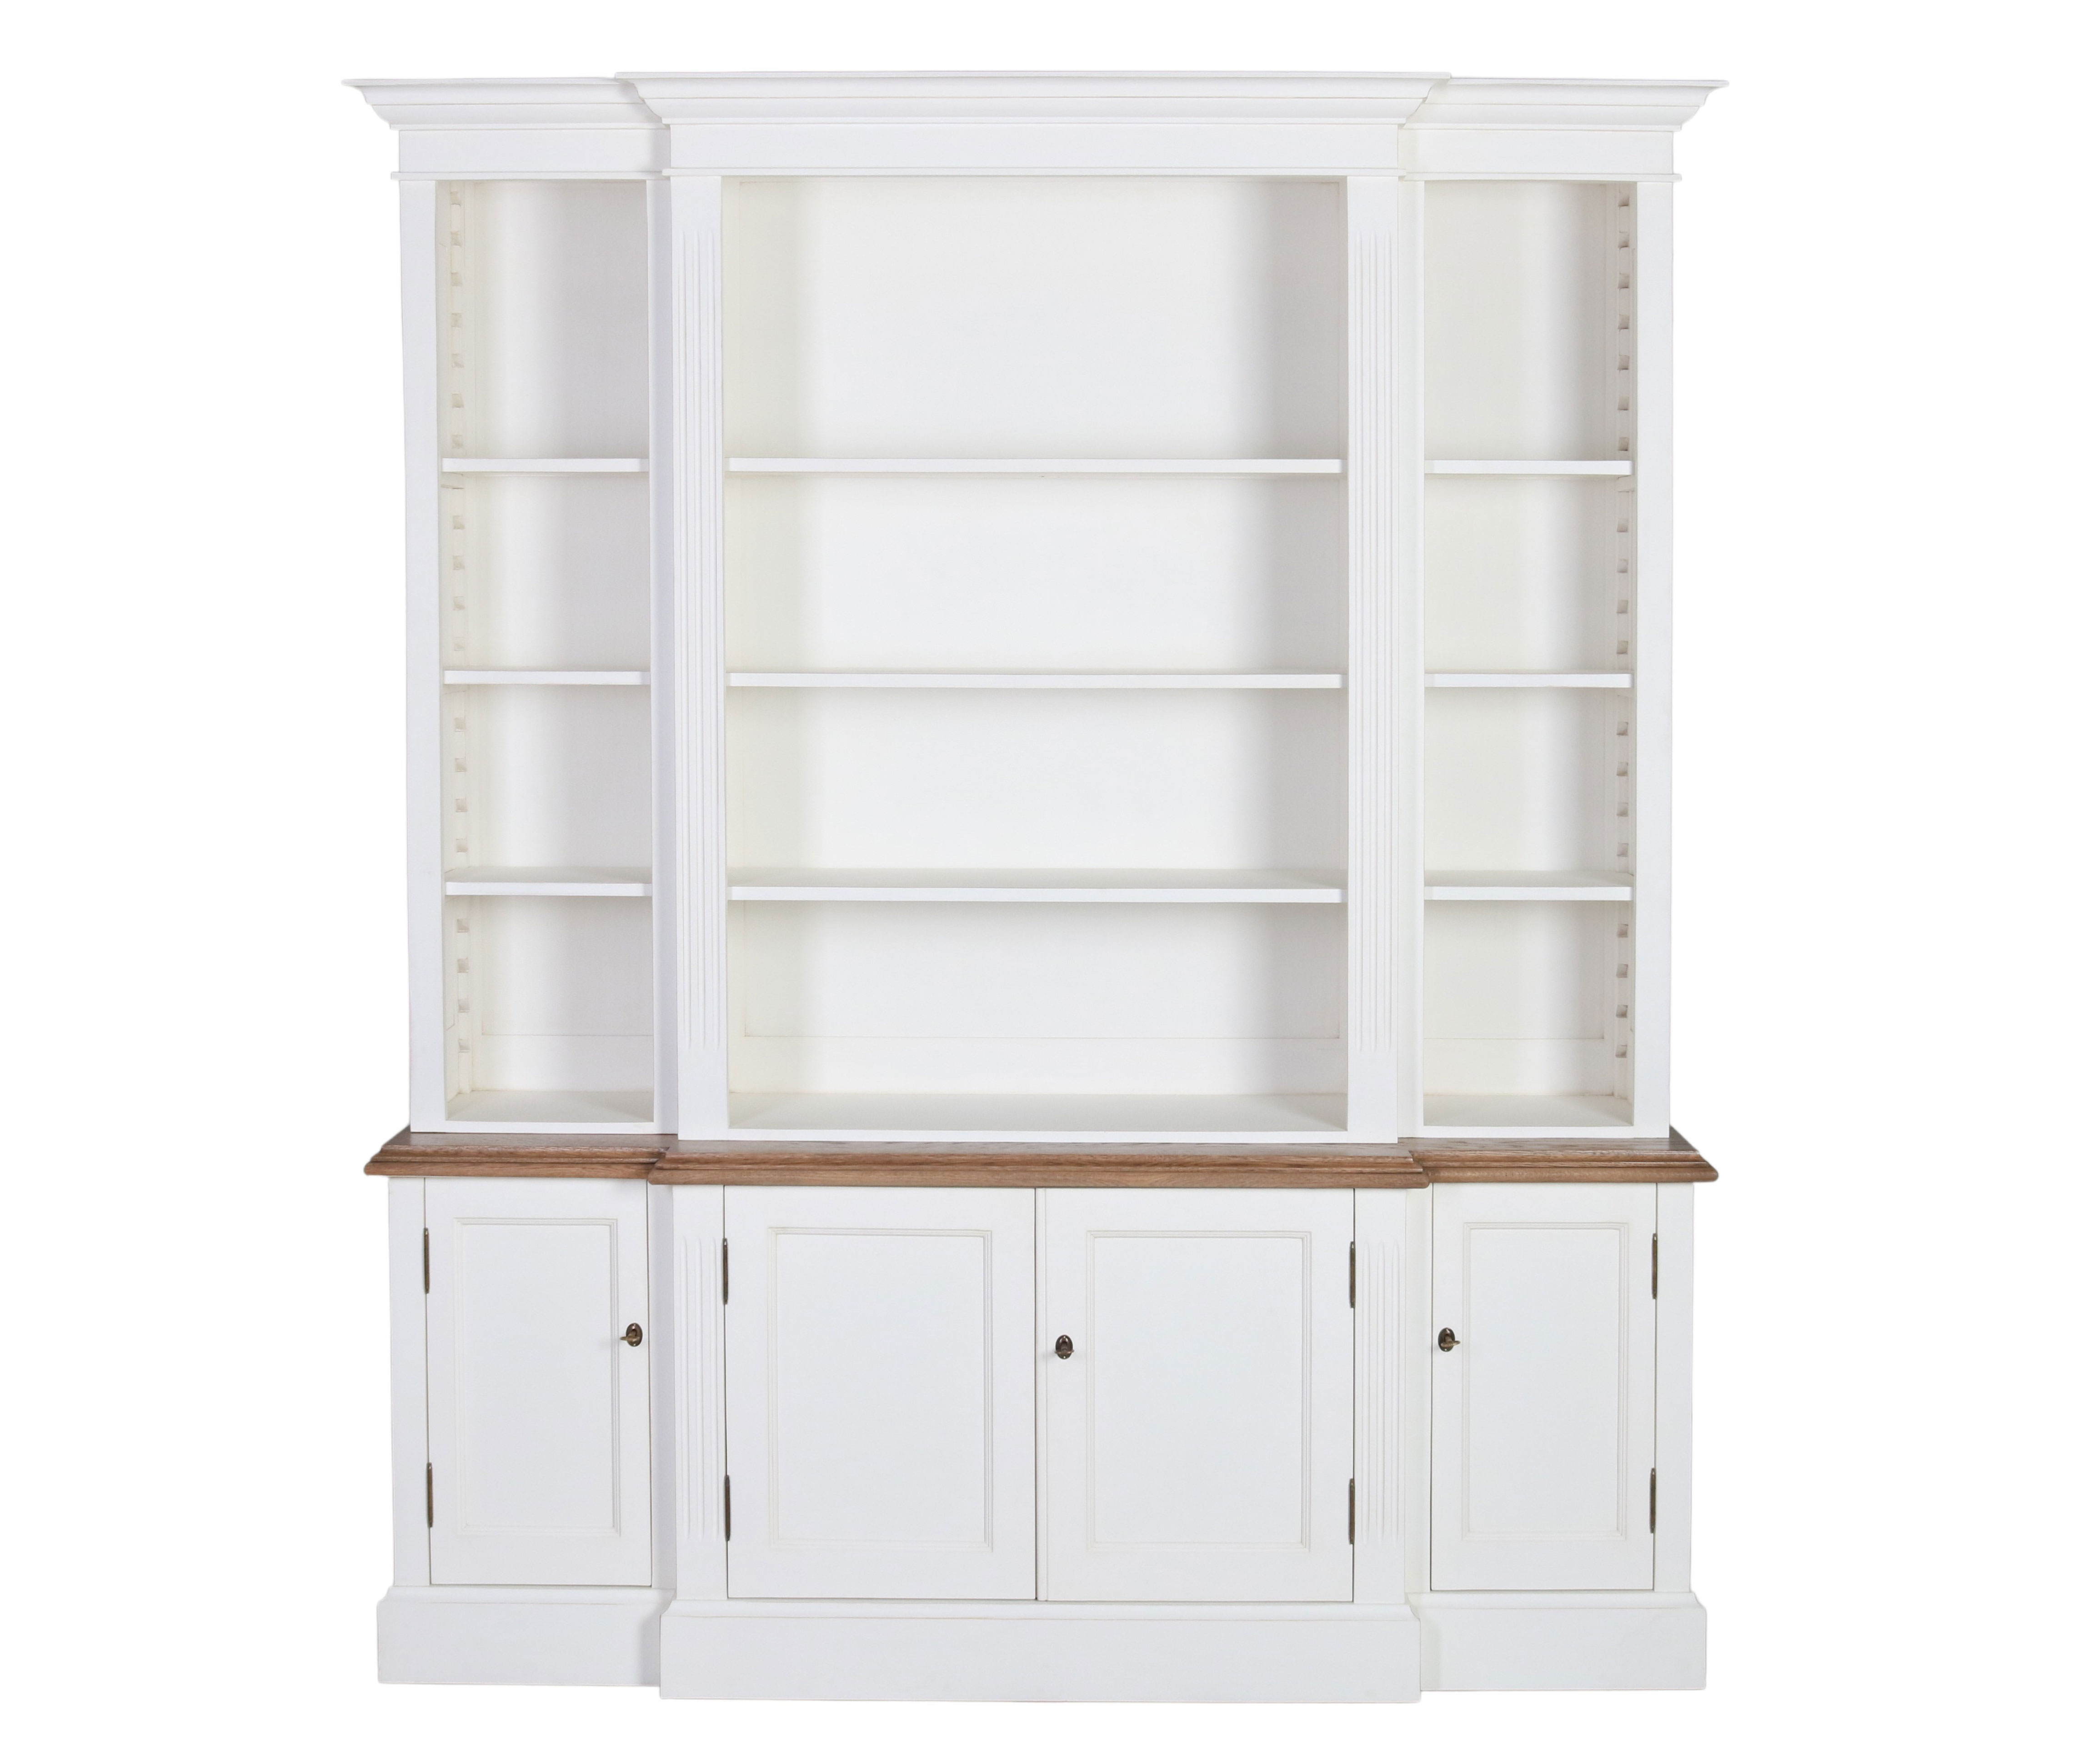 Ecs breakfront bookcase in antique white and weathered oak